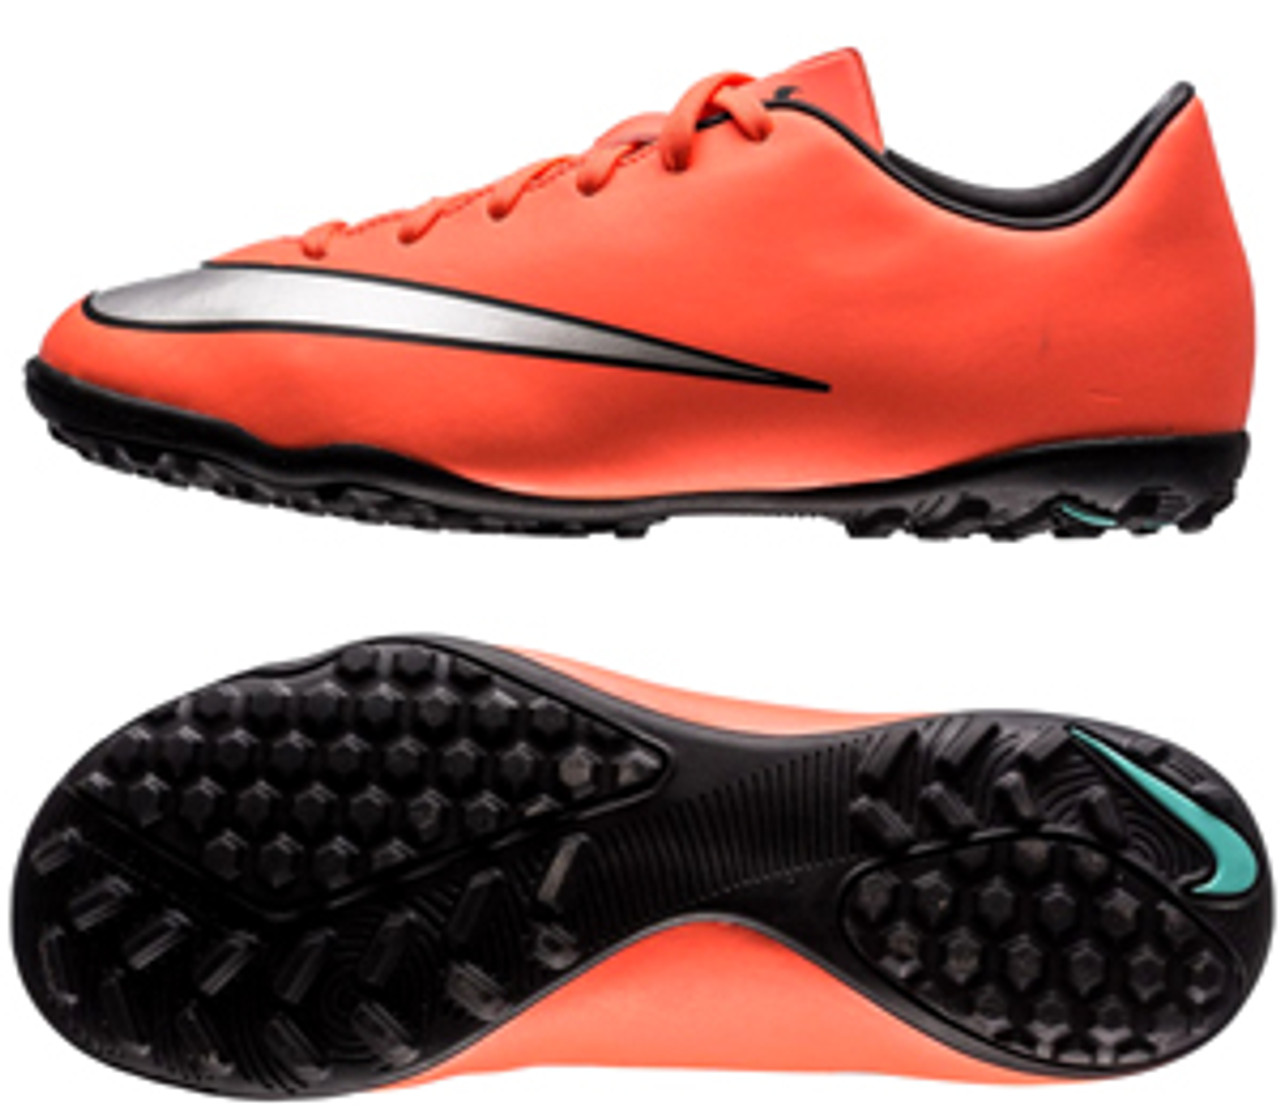 NIKE MERCURIAL IC bright Mango indoor soccer shoes Soccer